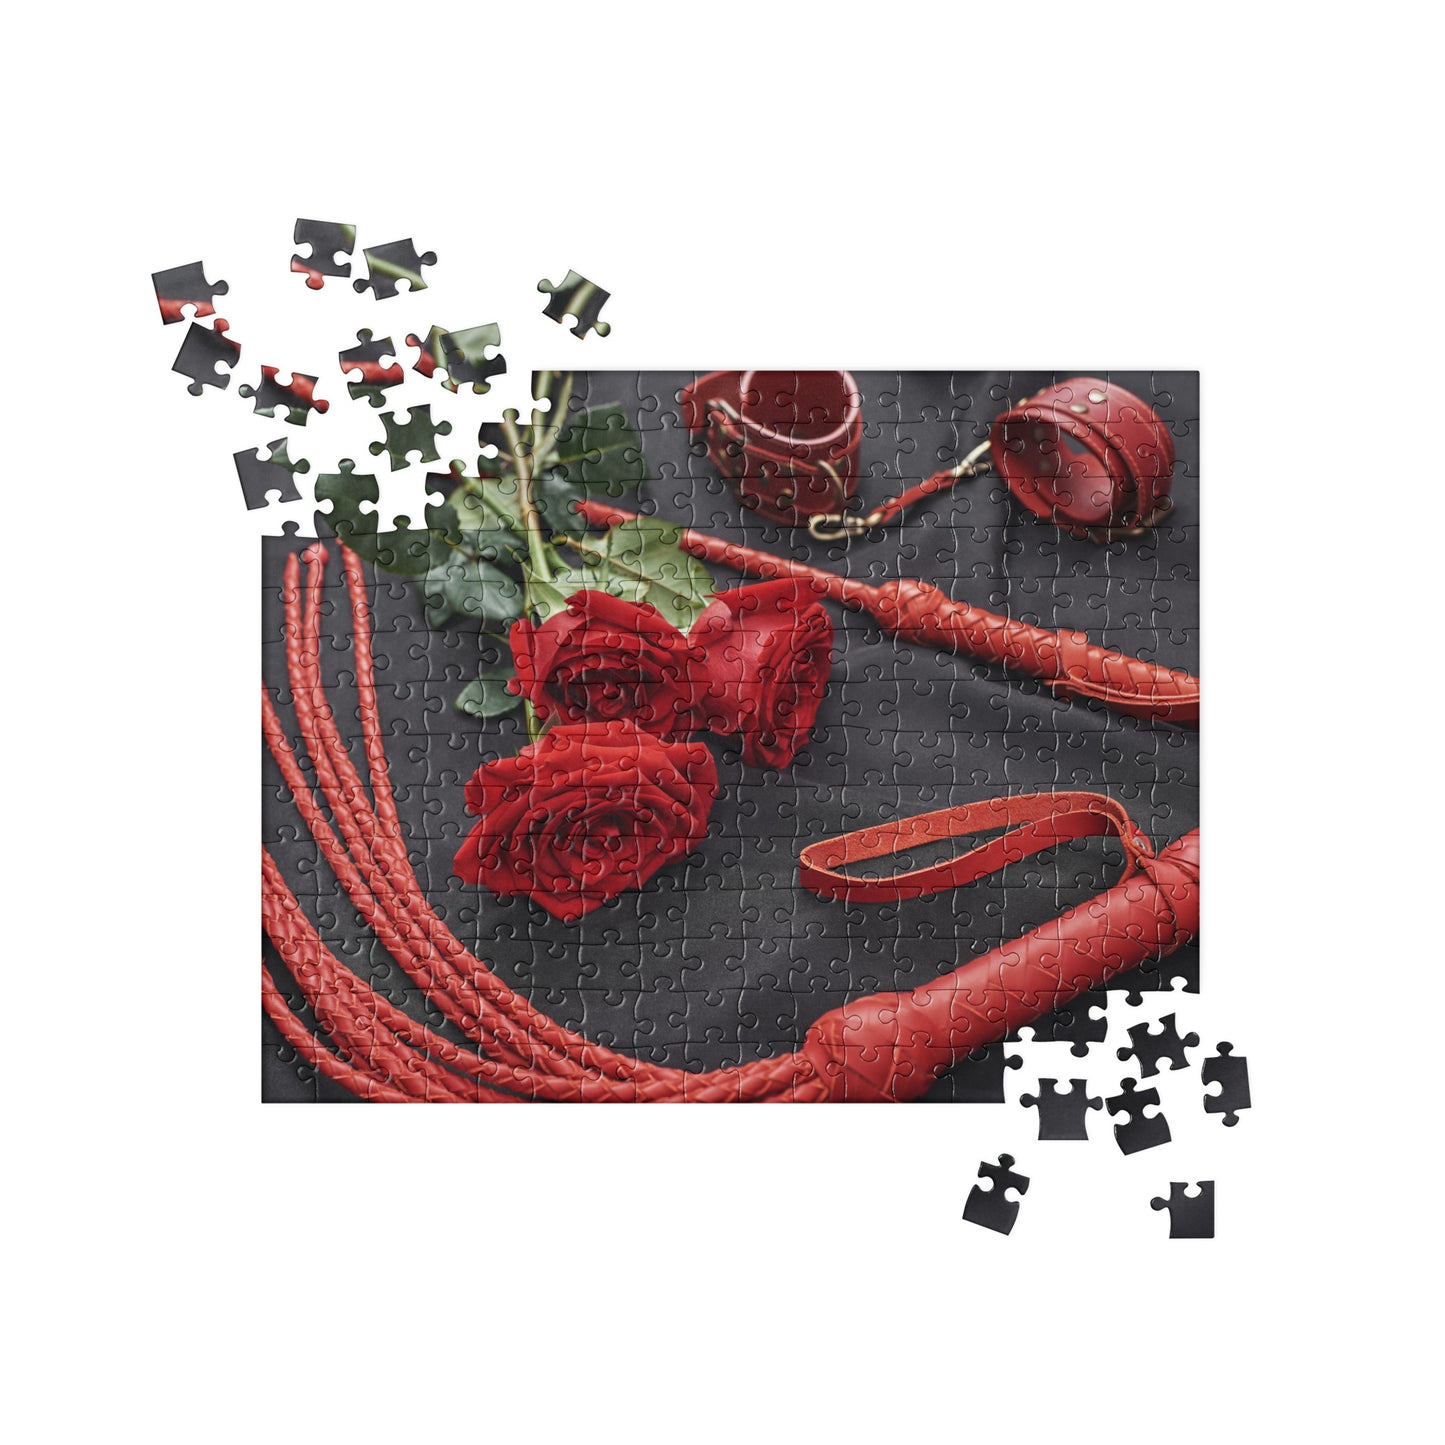 Sensual Jigsaw Puzzle: Leather BDSM Kit & Roses